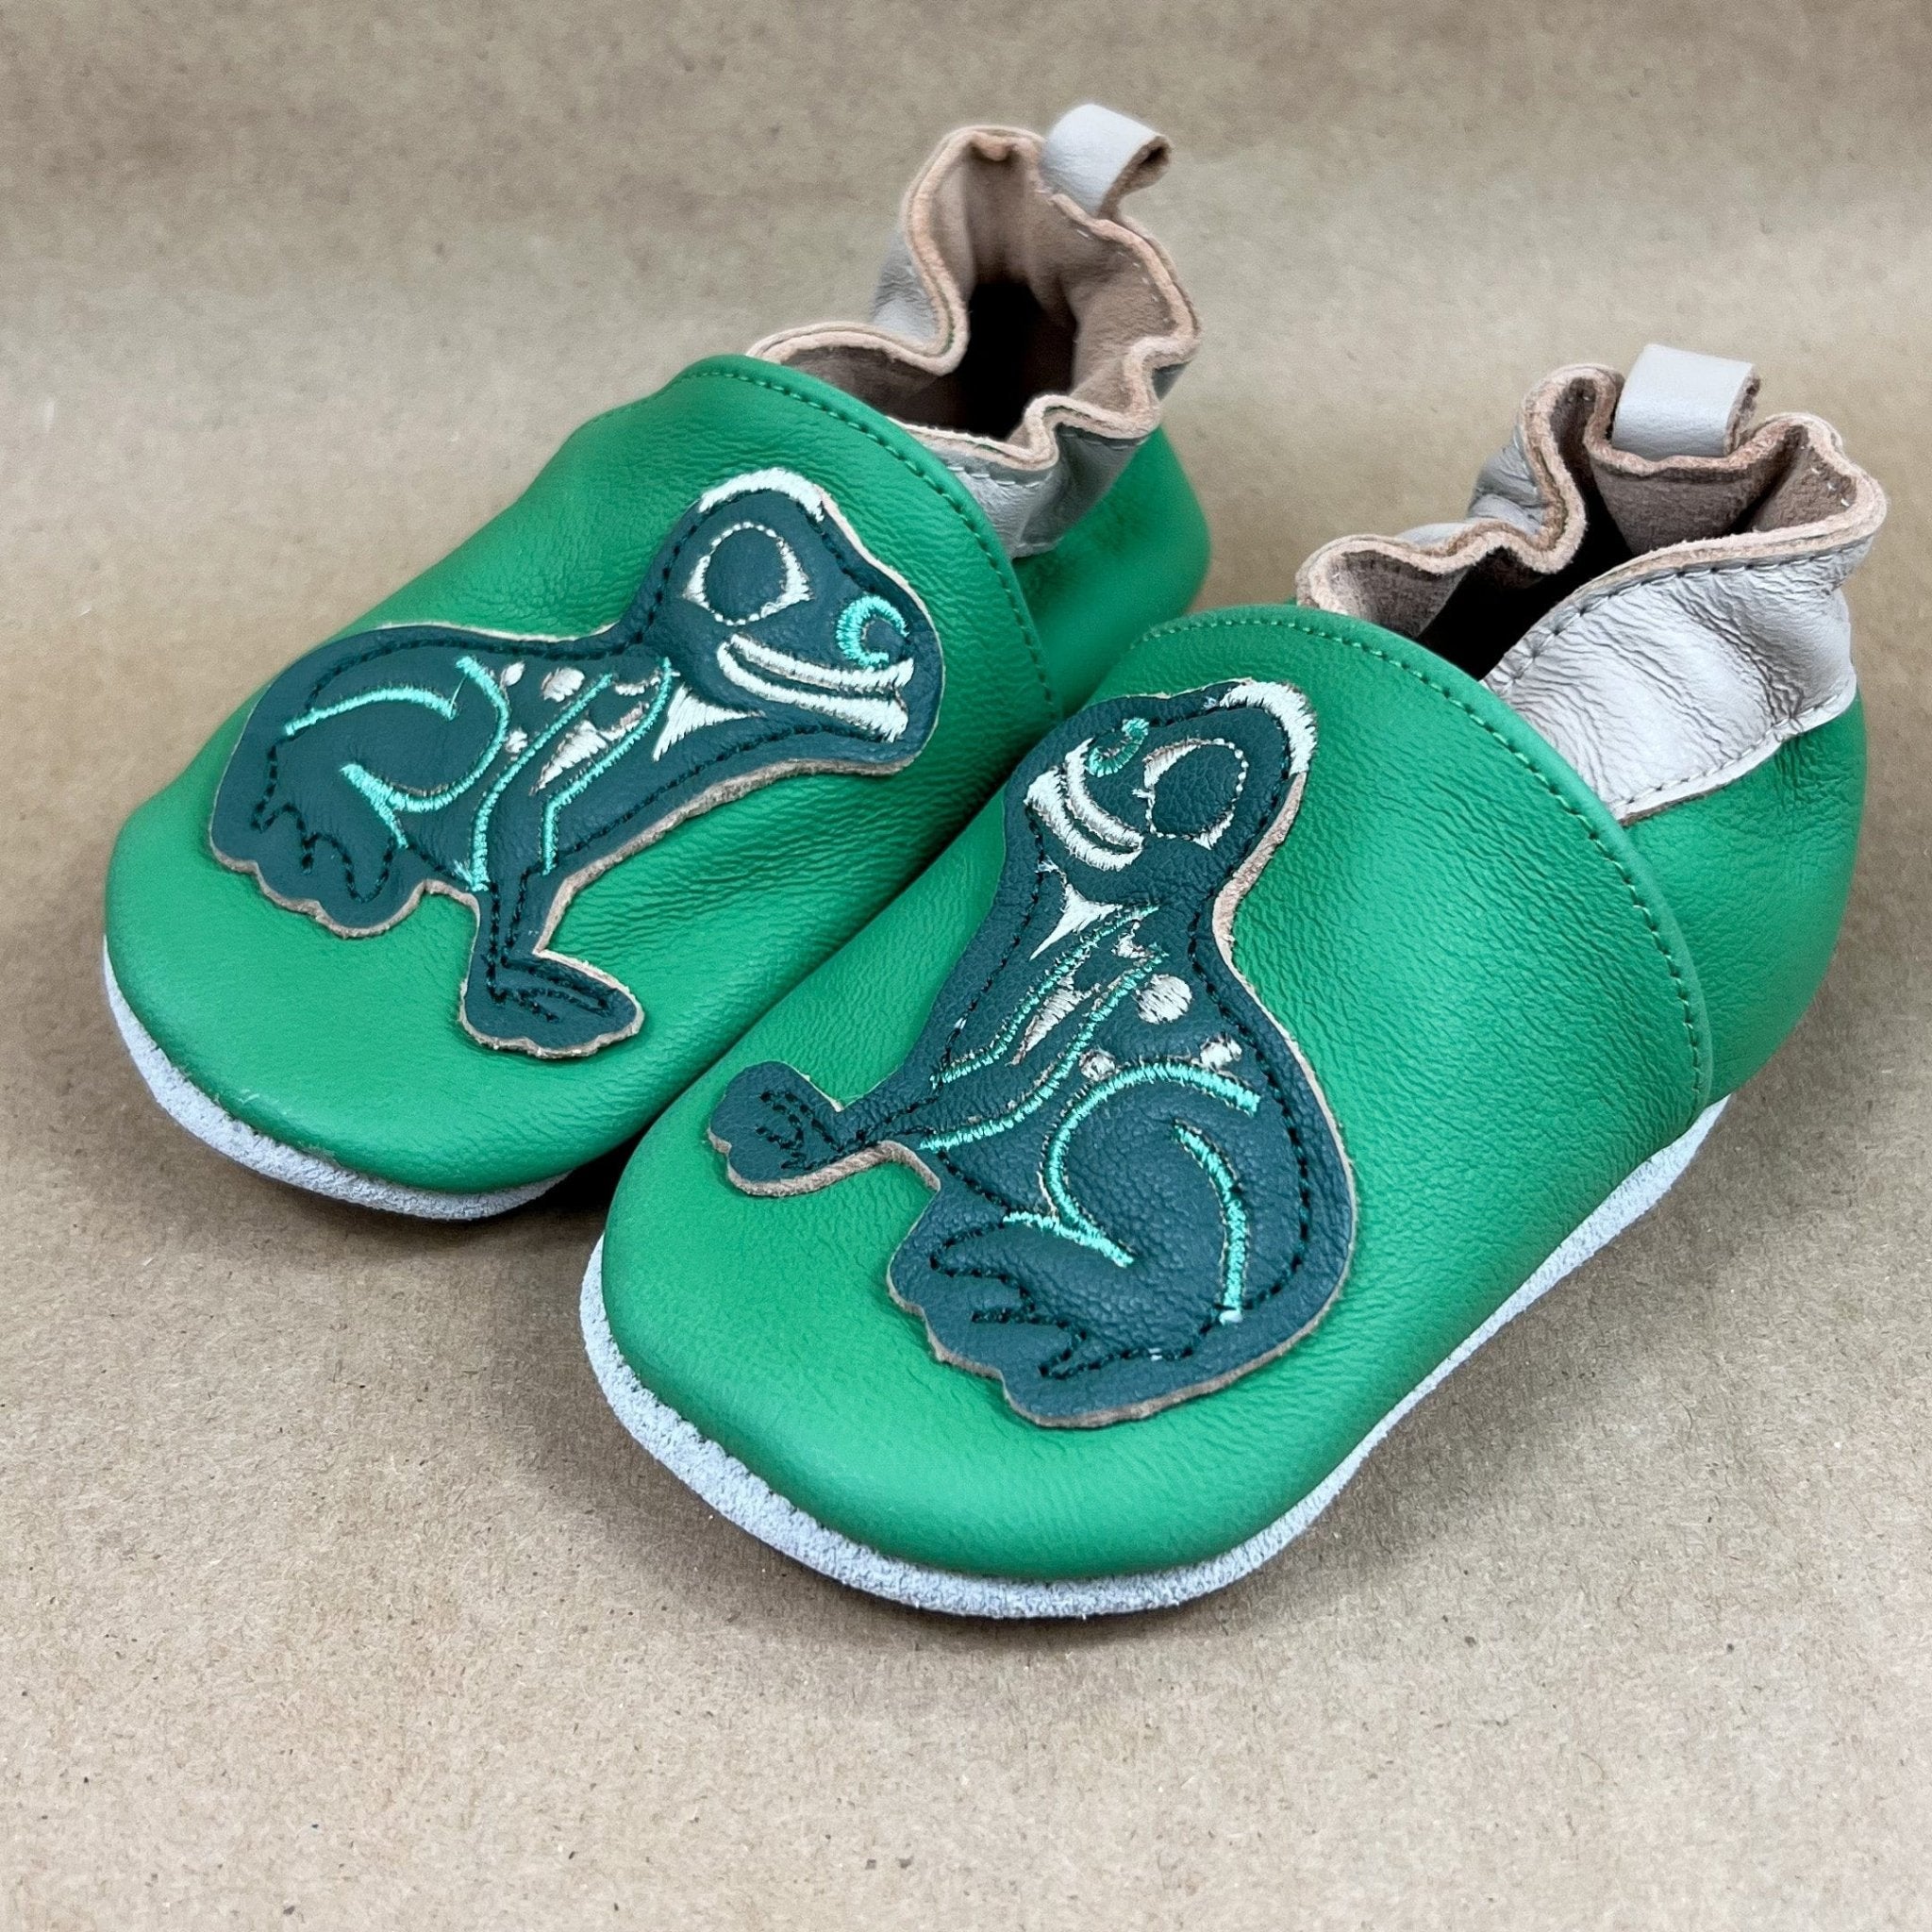 Baby Shoes - Indigenous Box